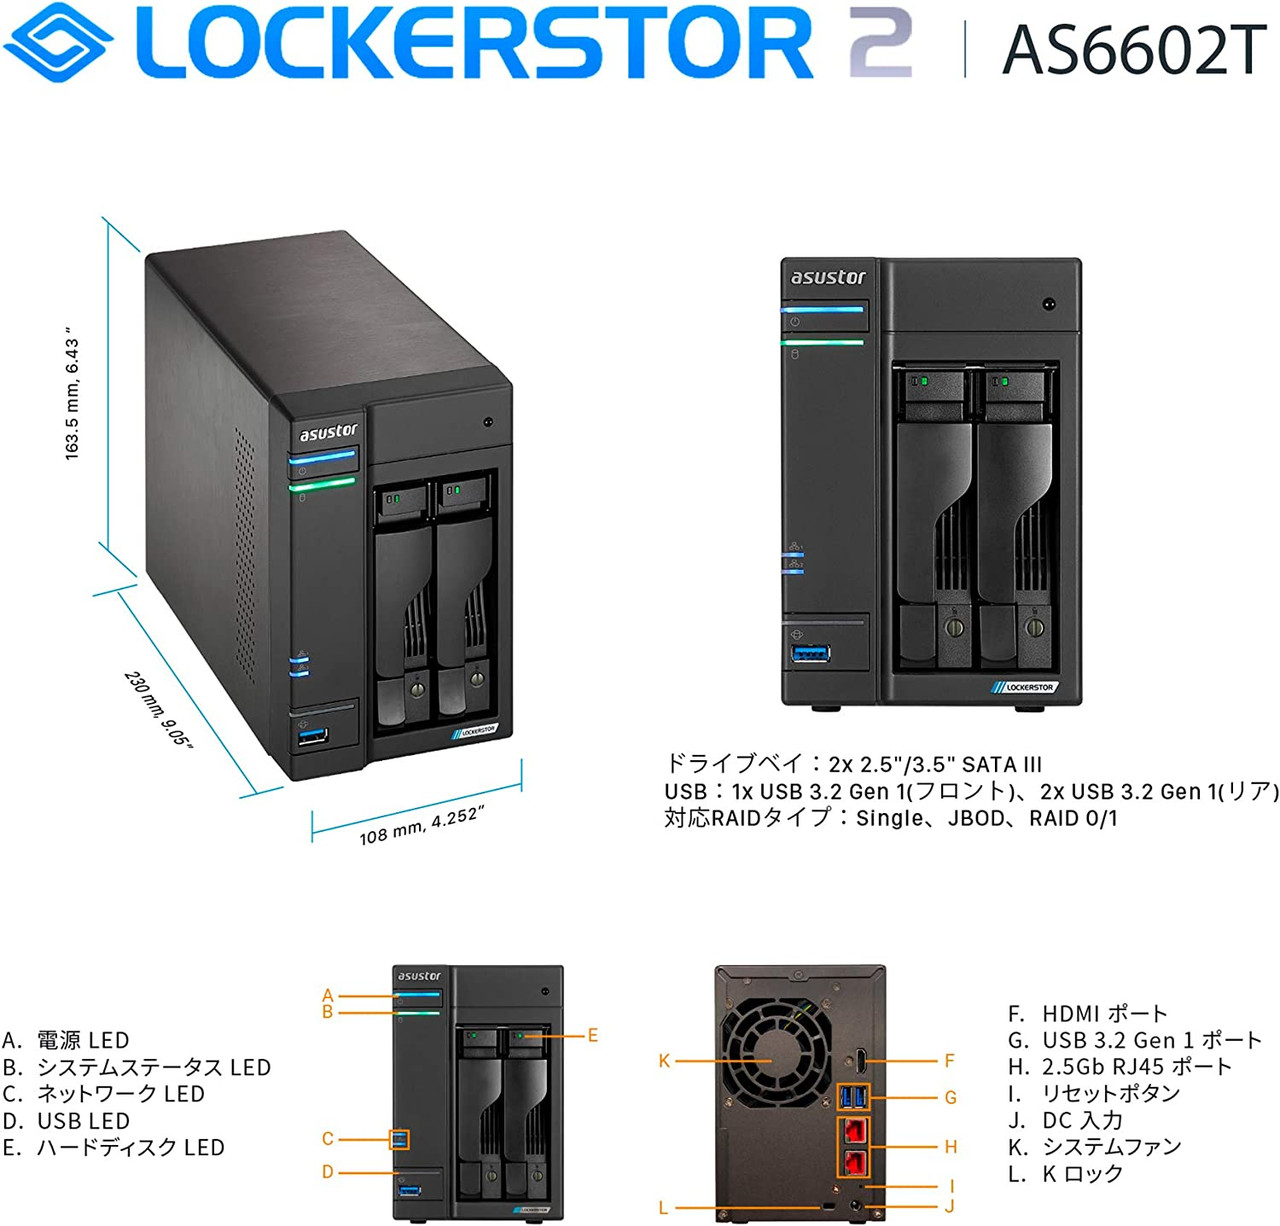 Asustor AS6602T LOCKERSTOR 2, Small Office 2-Bays NAS, Quad-Core CPU, Dual 2.5 Port, 4GB DDR4 RAM, Network Attached Storage (Diskless)